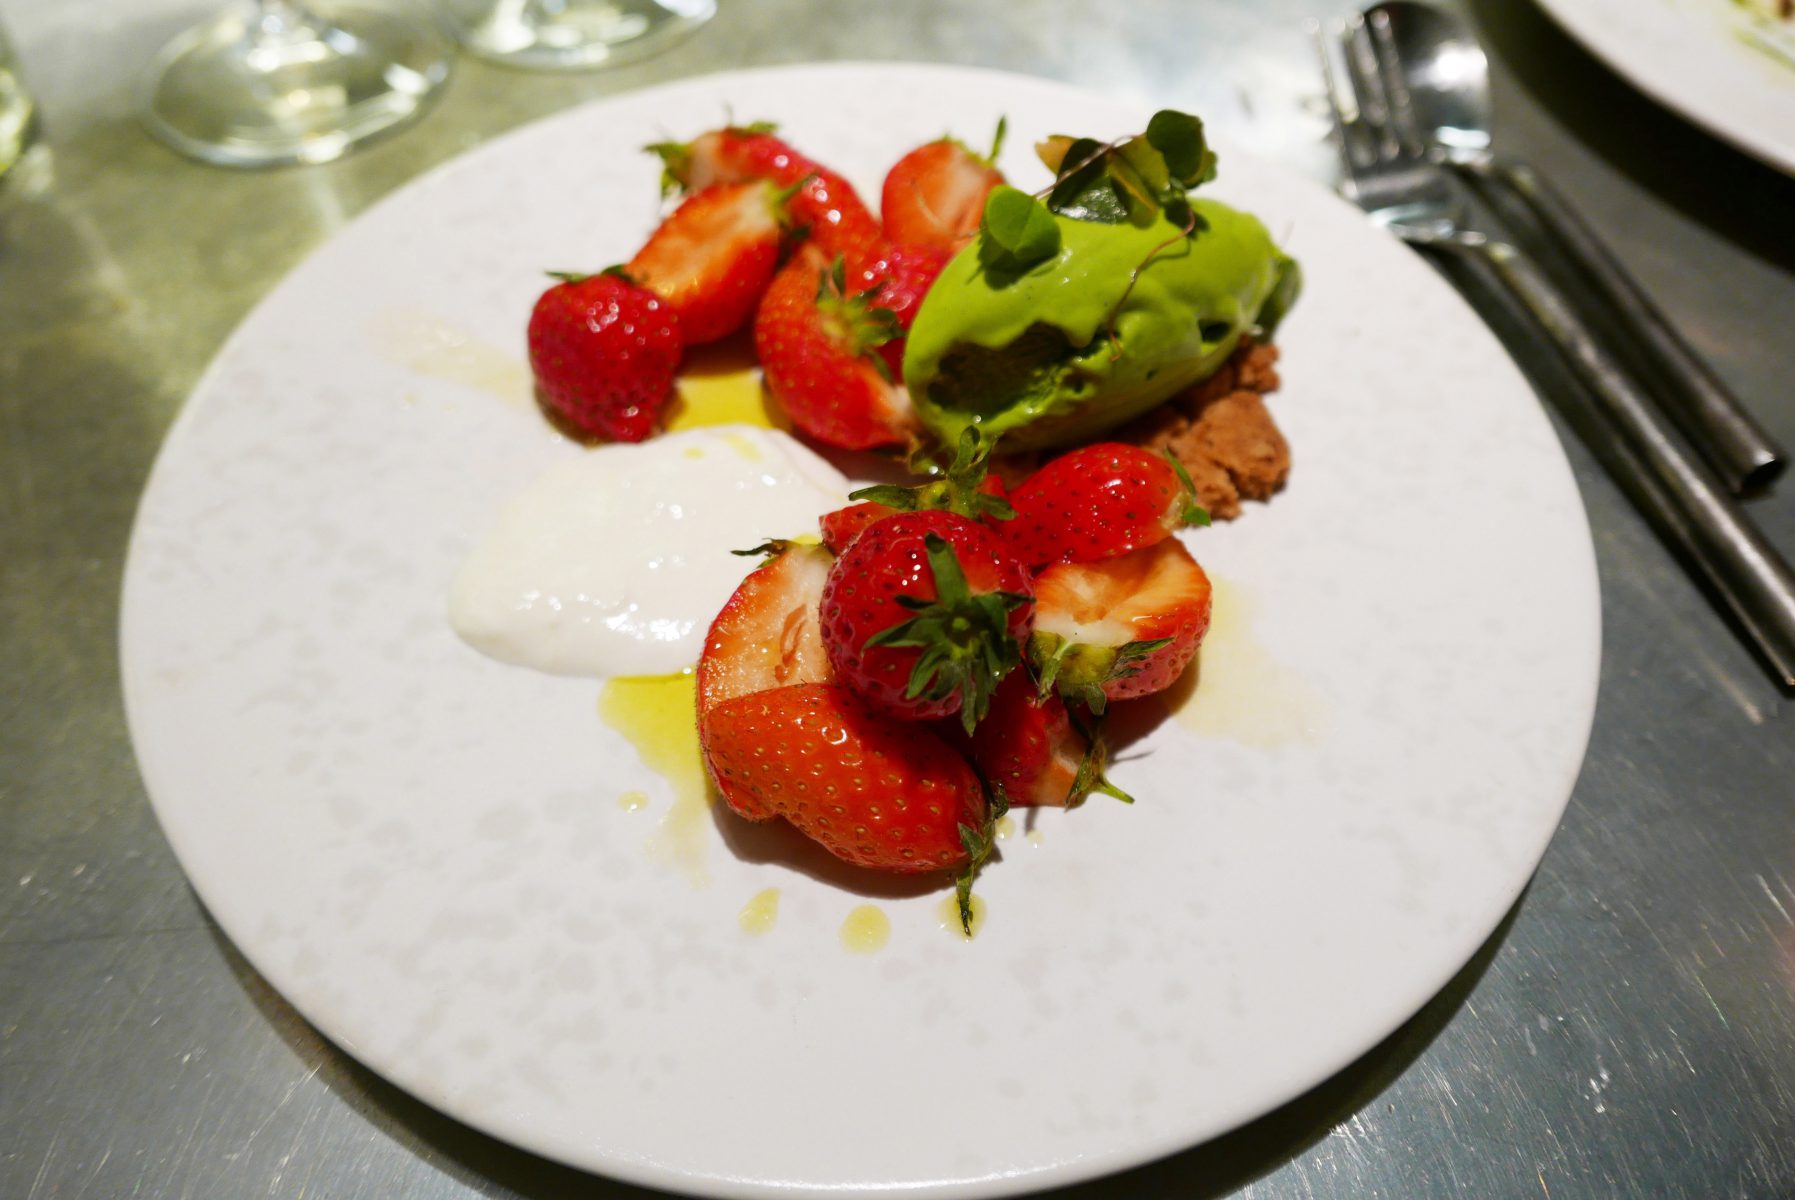 First strawberries with lovage ice cream